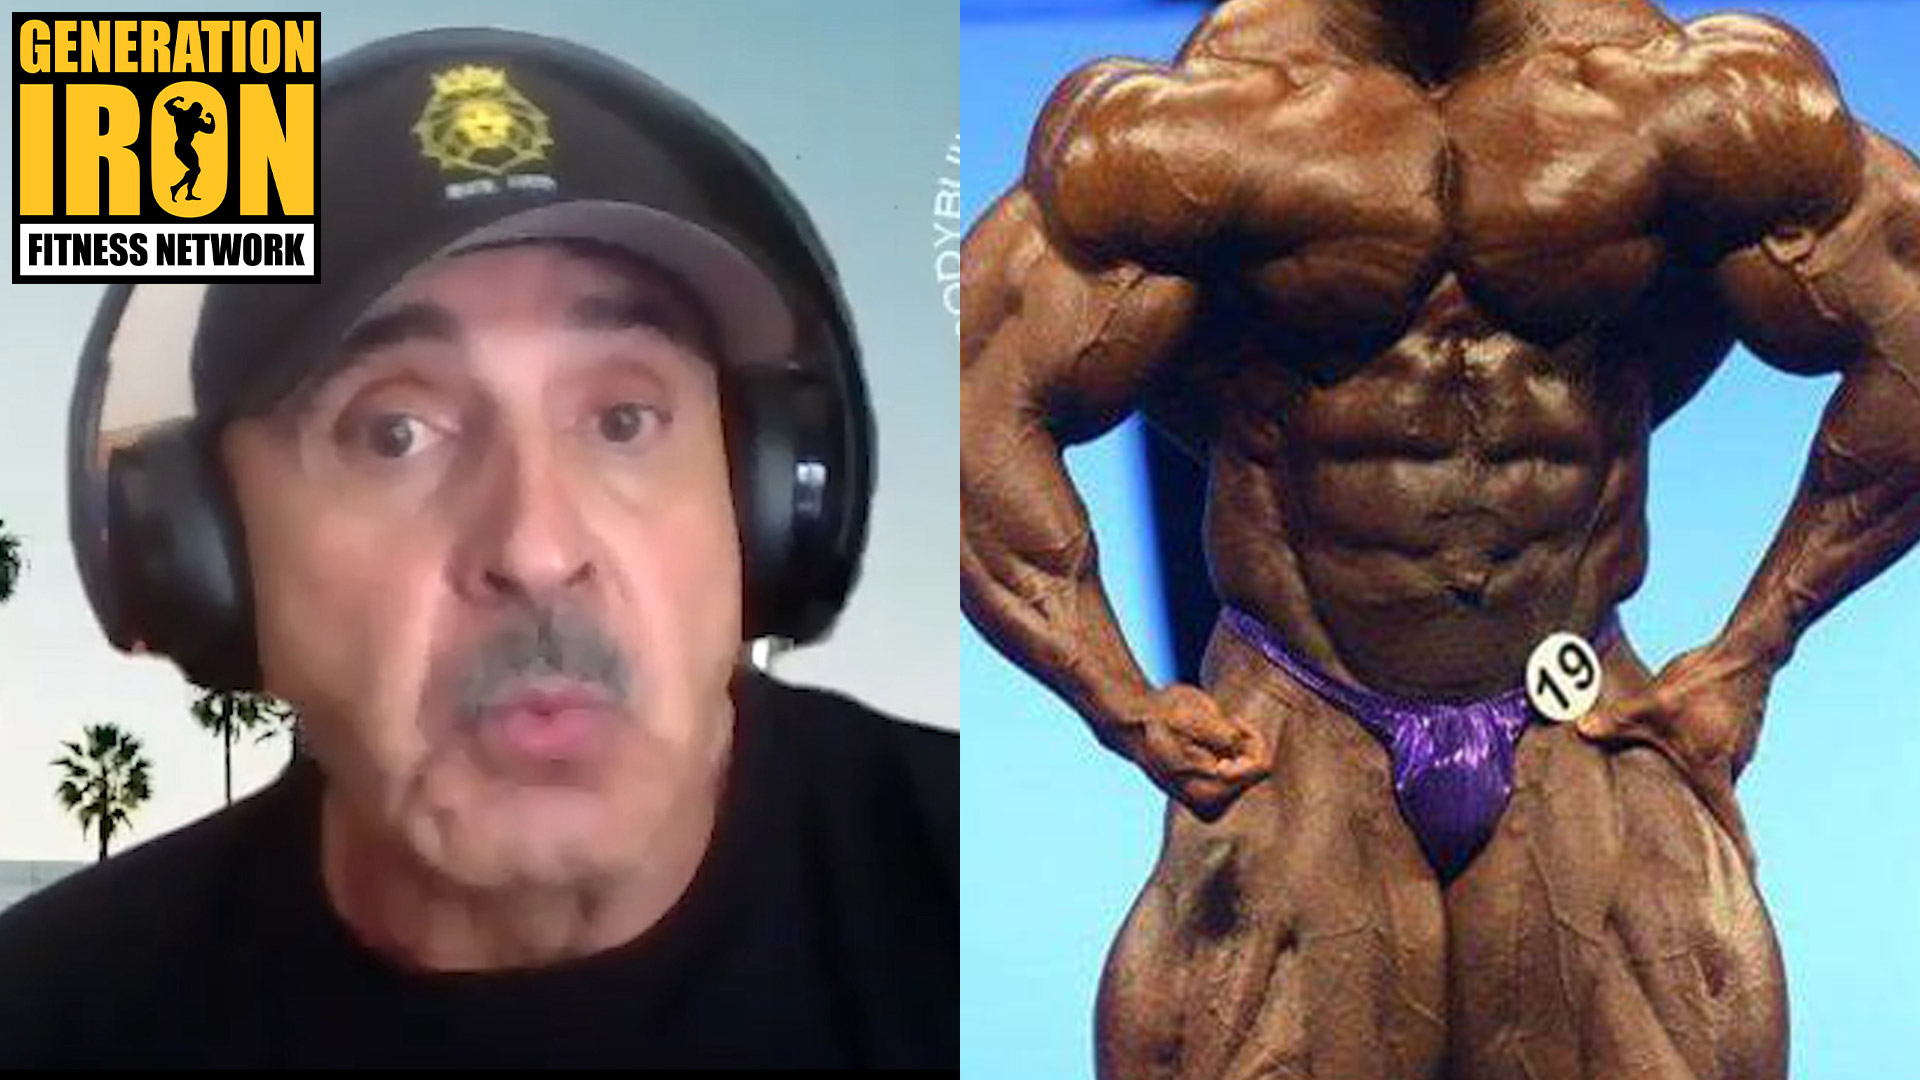 Samir Bannout: Bodybuilders Are Rushing To Build Muscle Too Fast